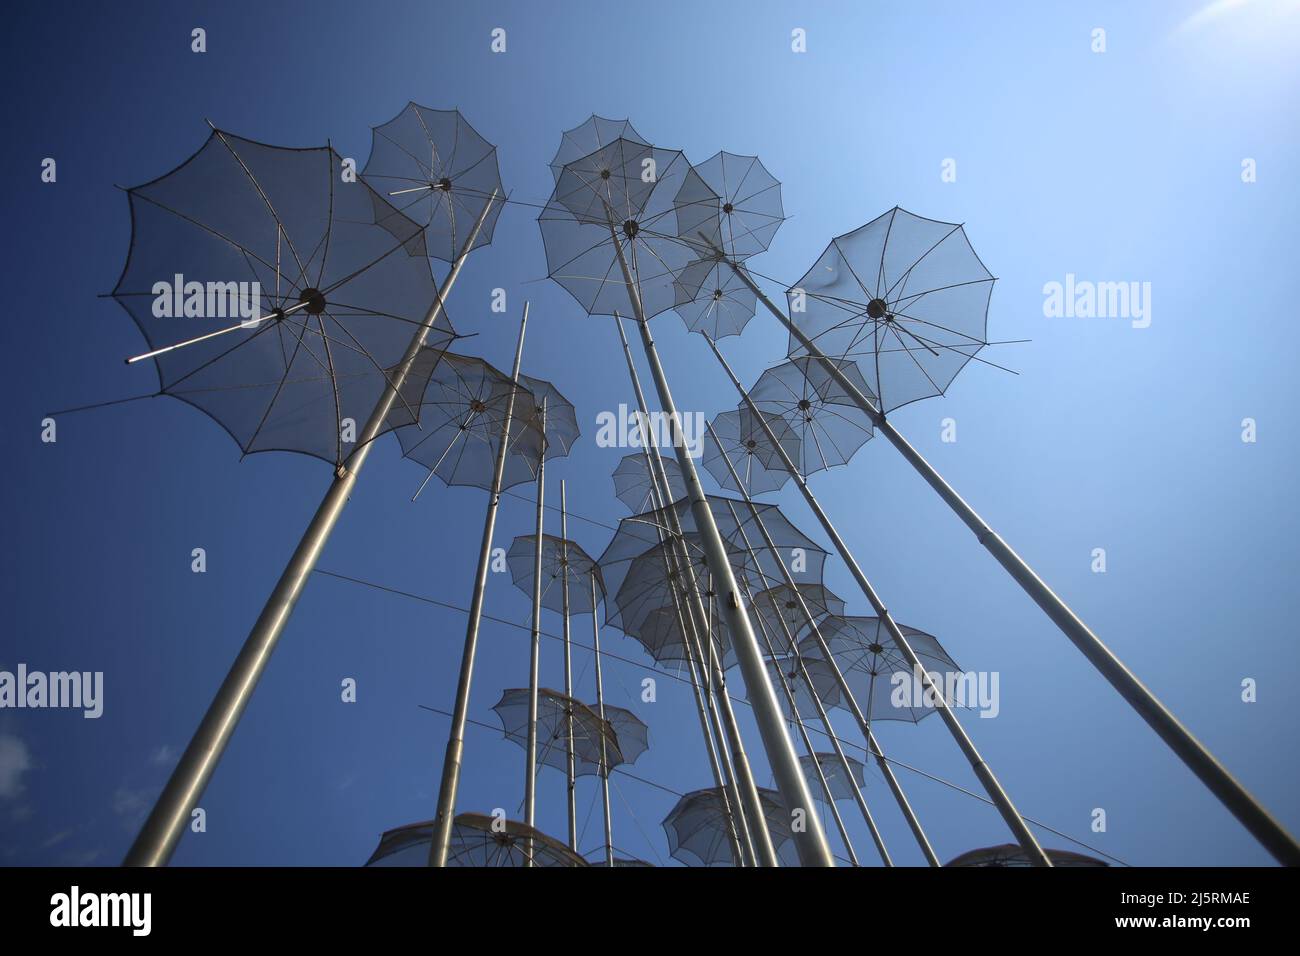 The 'Umbrellas' is a work of art by the famous Greek sculptor Giorgios Zoggolopoulos located on the Aegean sea waterfront in Thessaloniki, Greece. Stock Photo